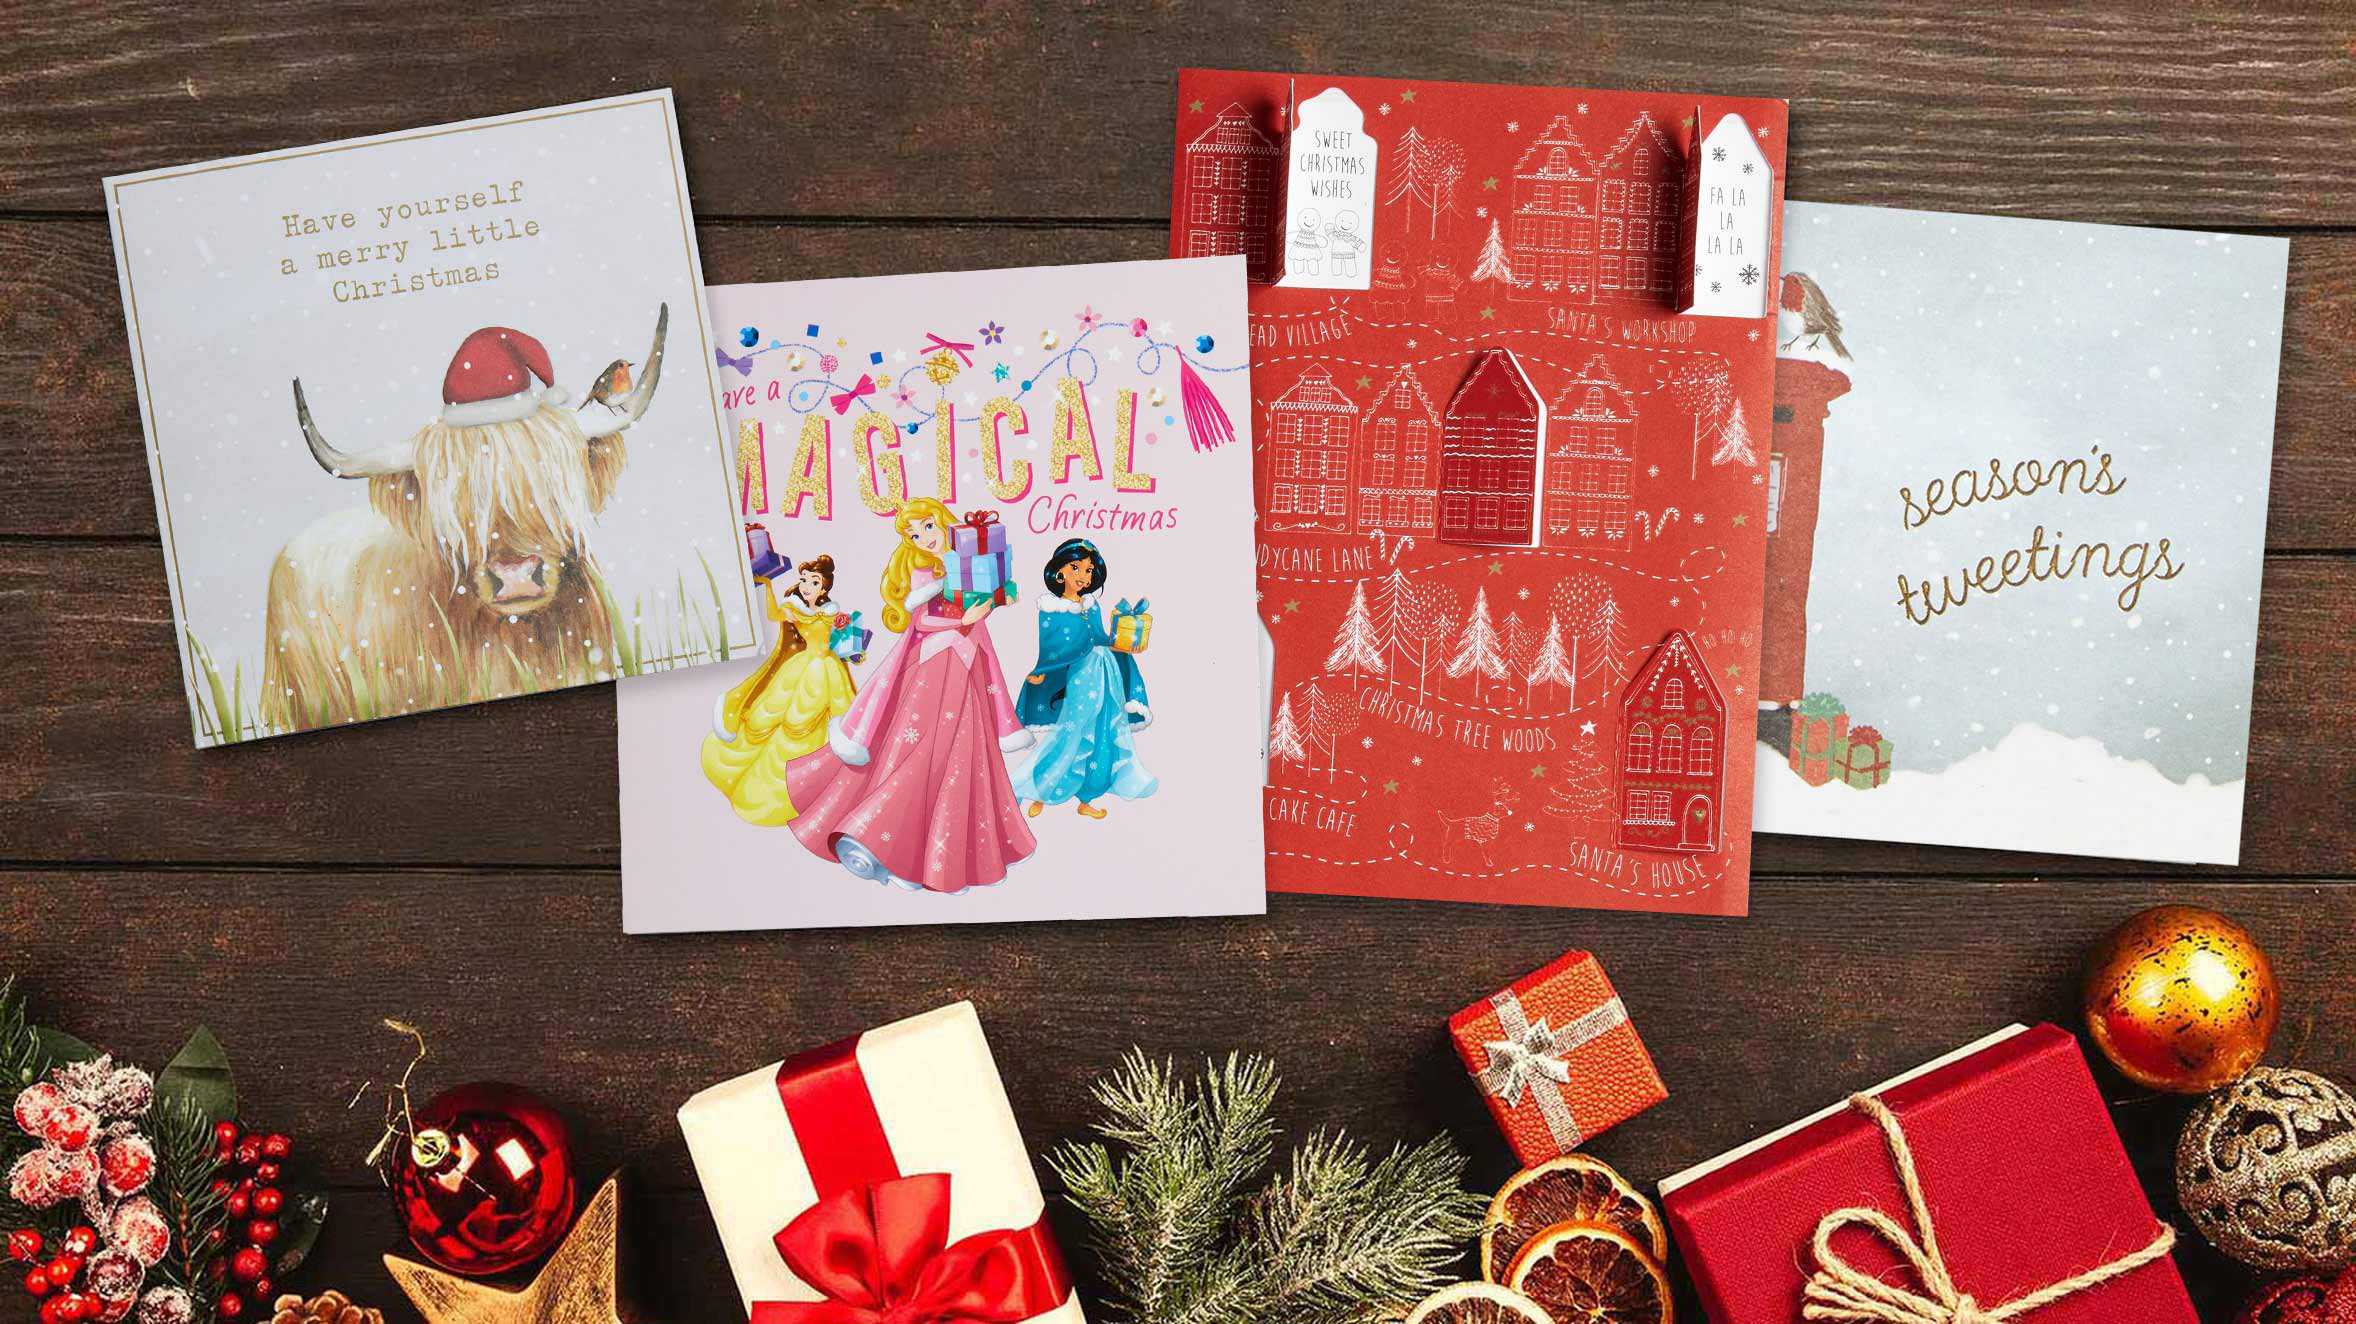 Get your charity Christmas cards from Next and support MakeAWish